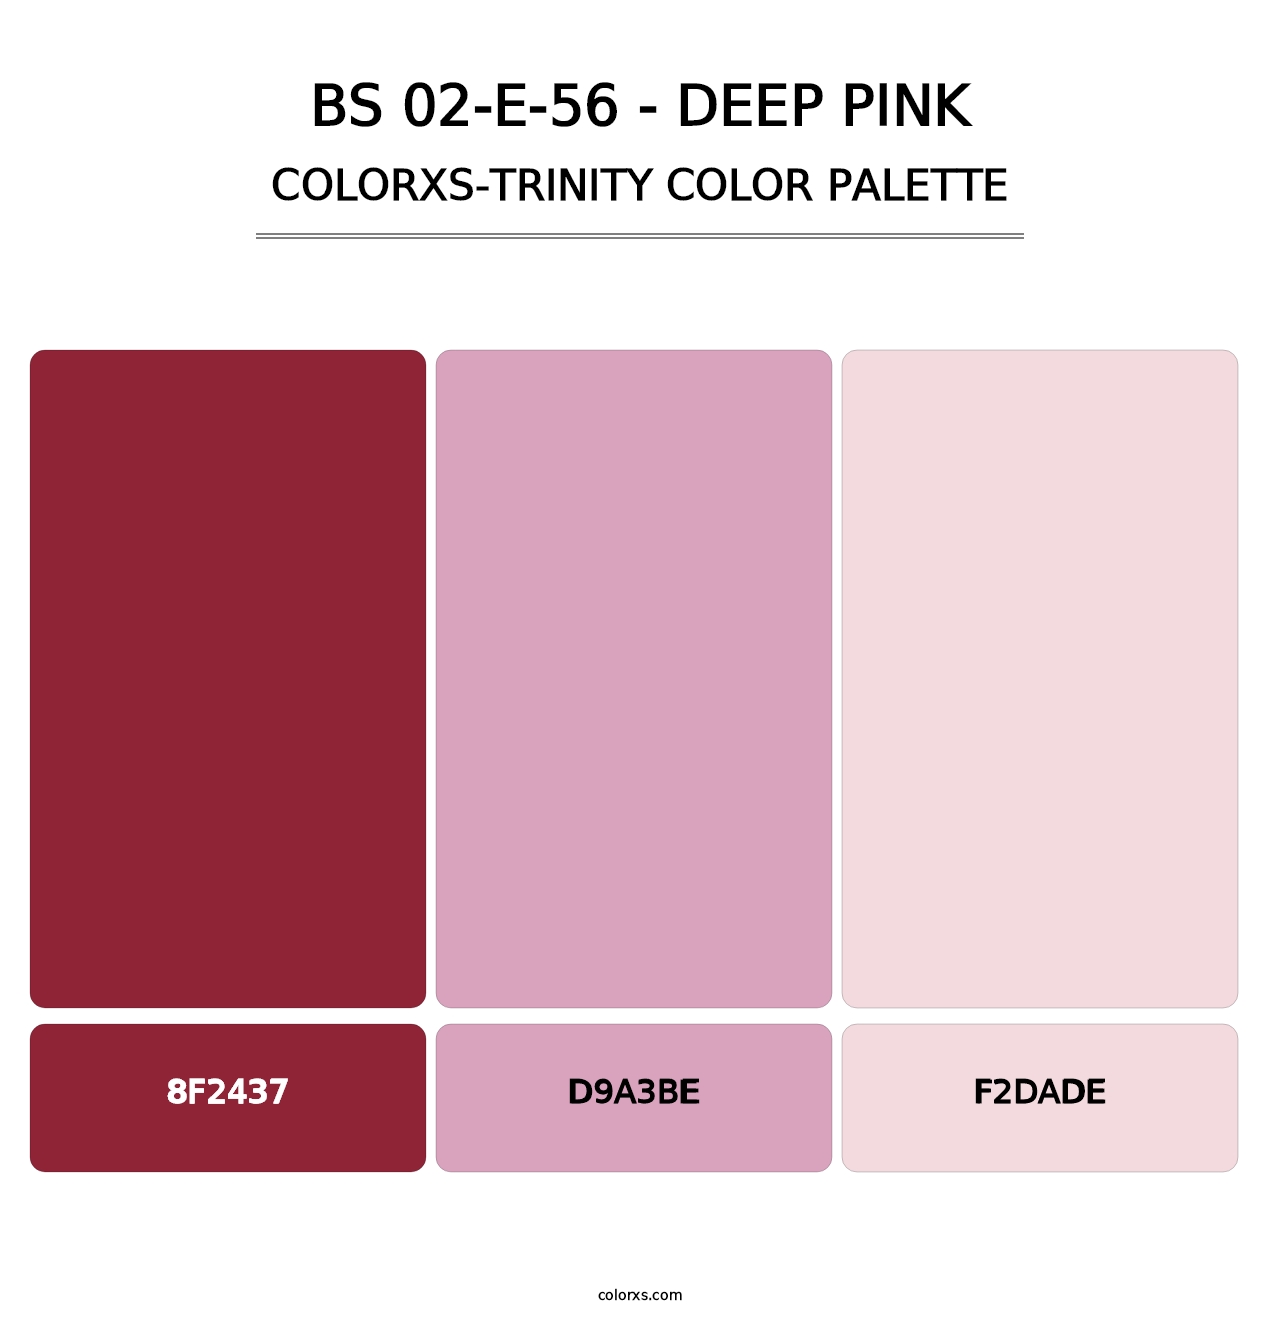 BS 02-E-56 - Deep Pink - Colorxs Trinity Palette